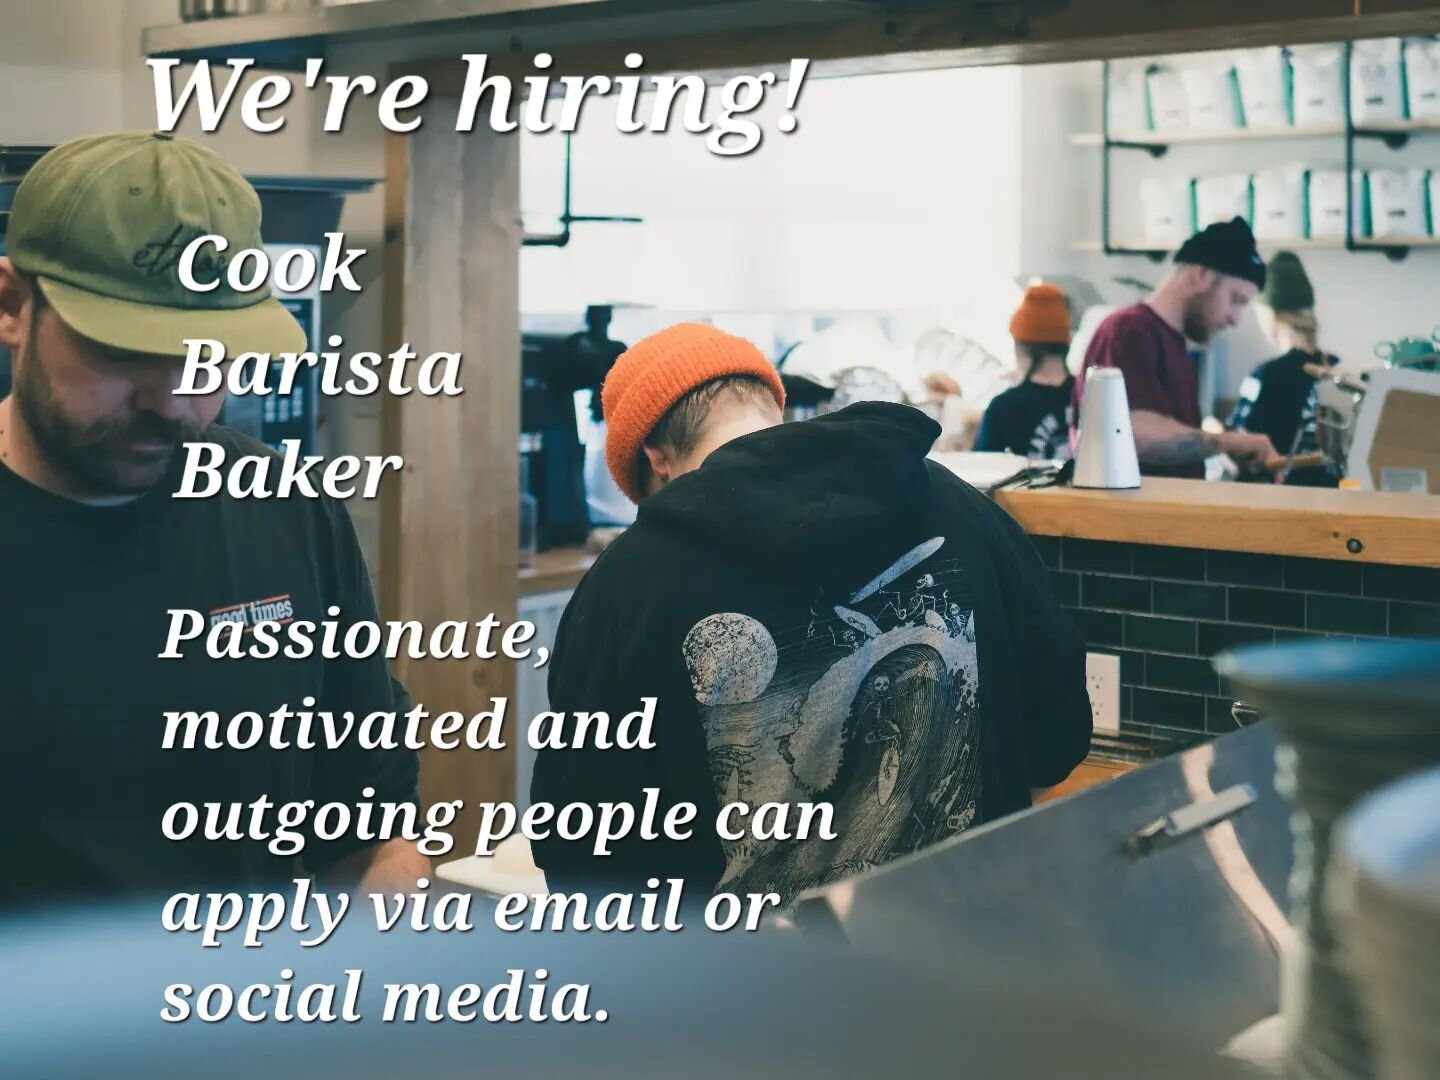 Join the team!

We're looking for the right people to bolster our crew.

If you have a passion for people, cooking, coffee or baking or all of the above, send us your resume today!

We offer living wages, a flexible schedule, perks, opportunities for